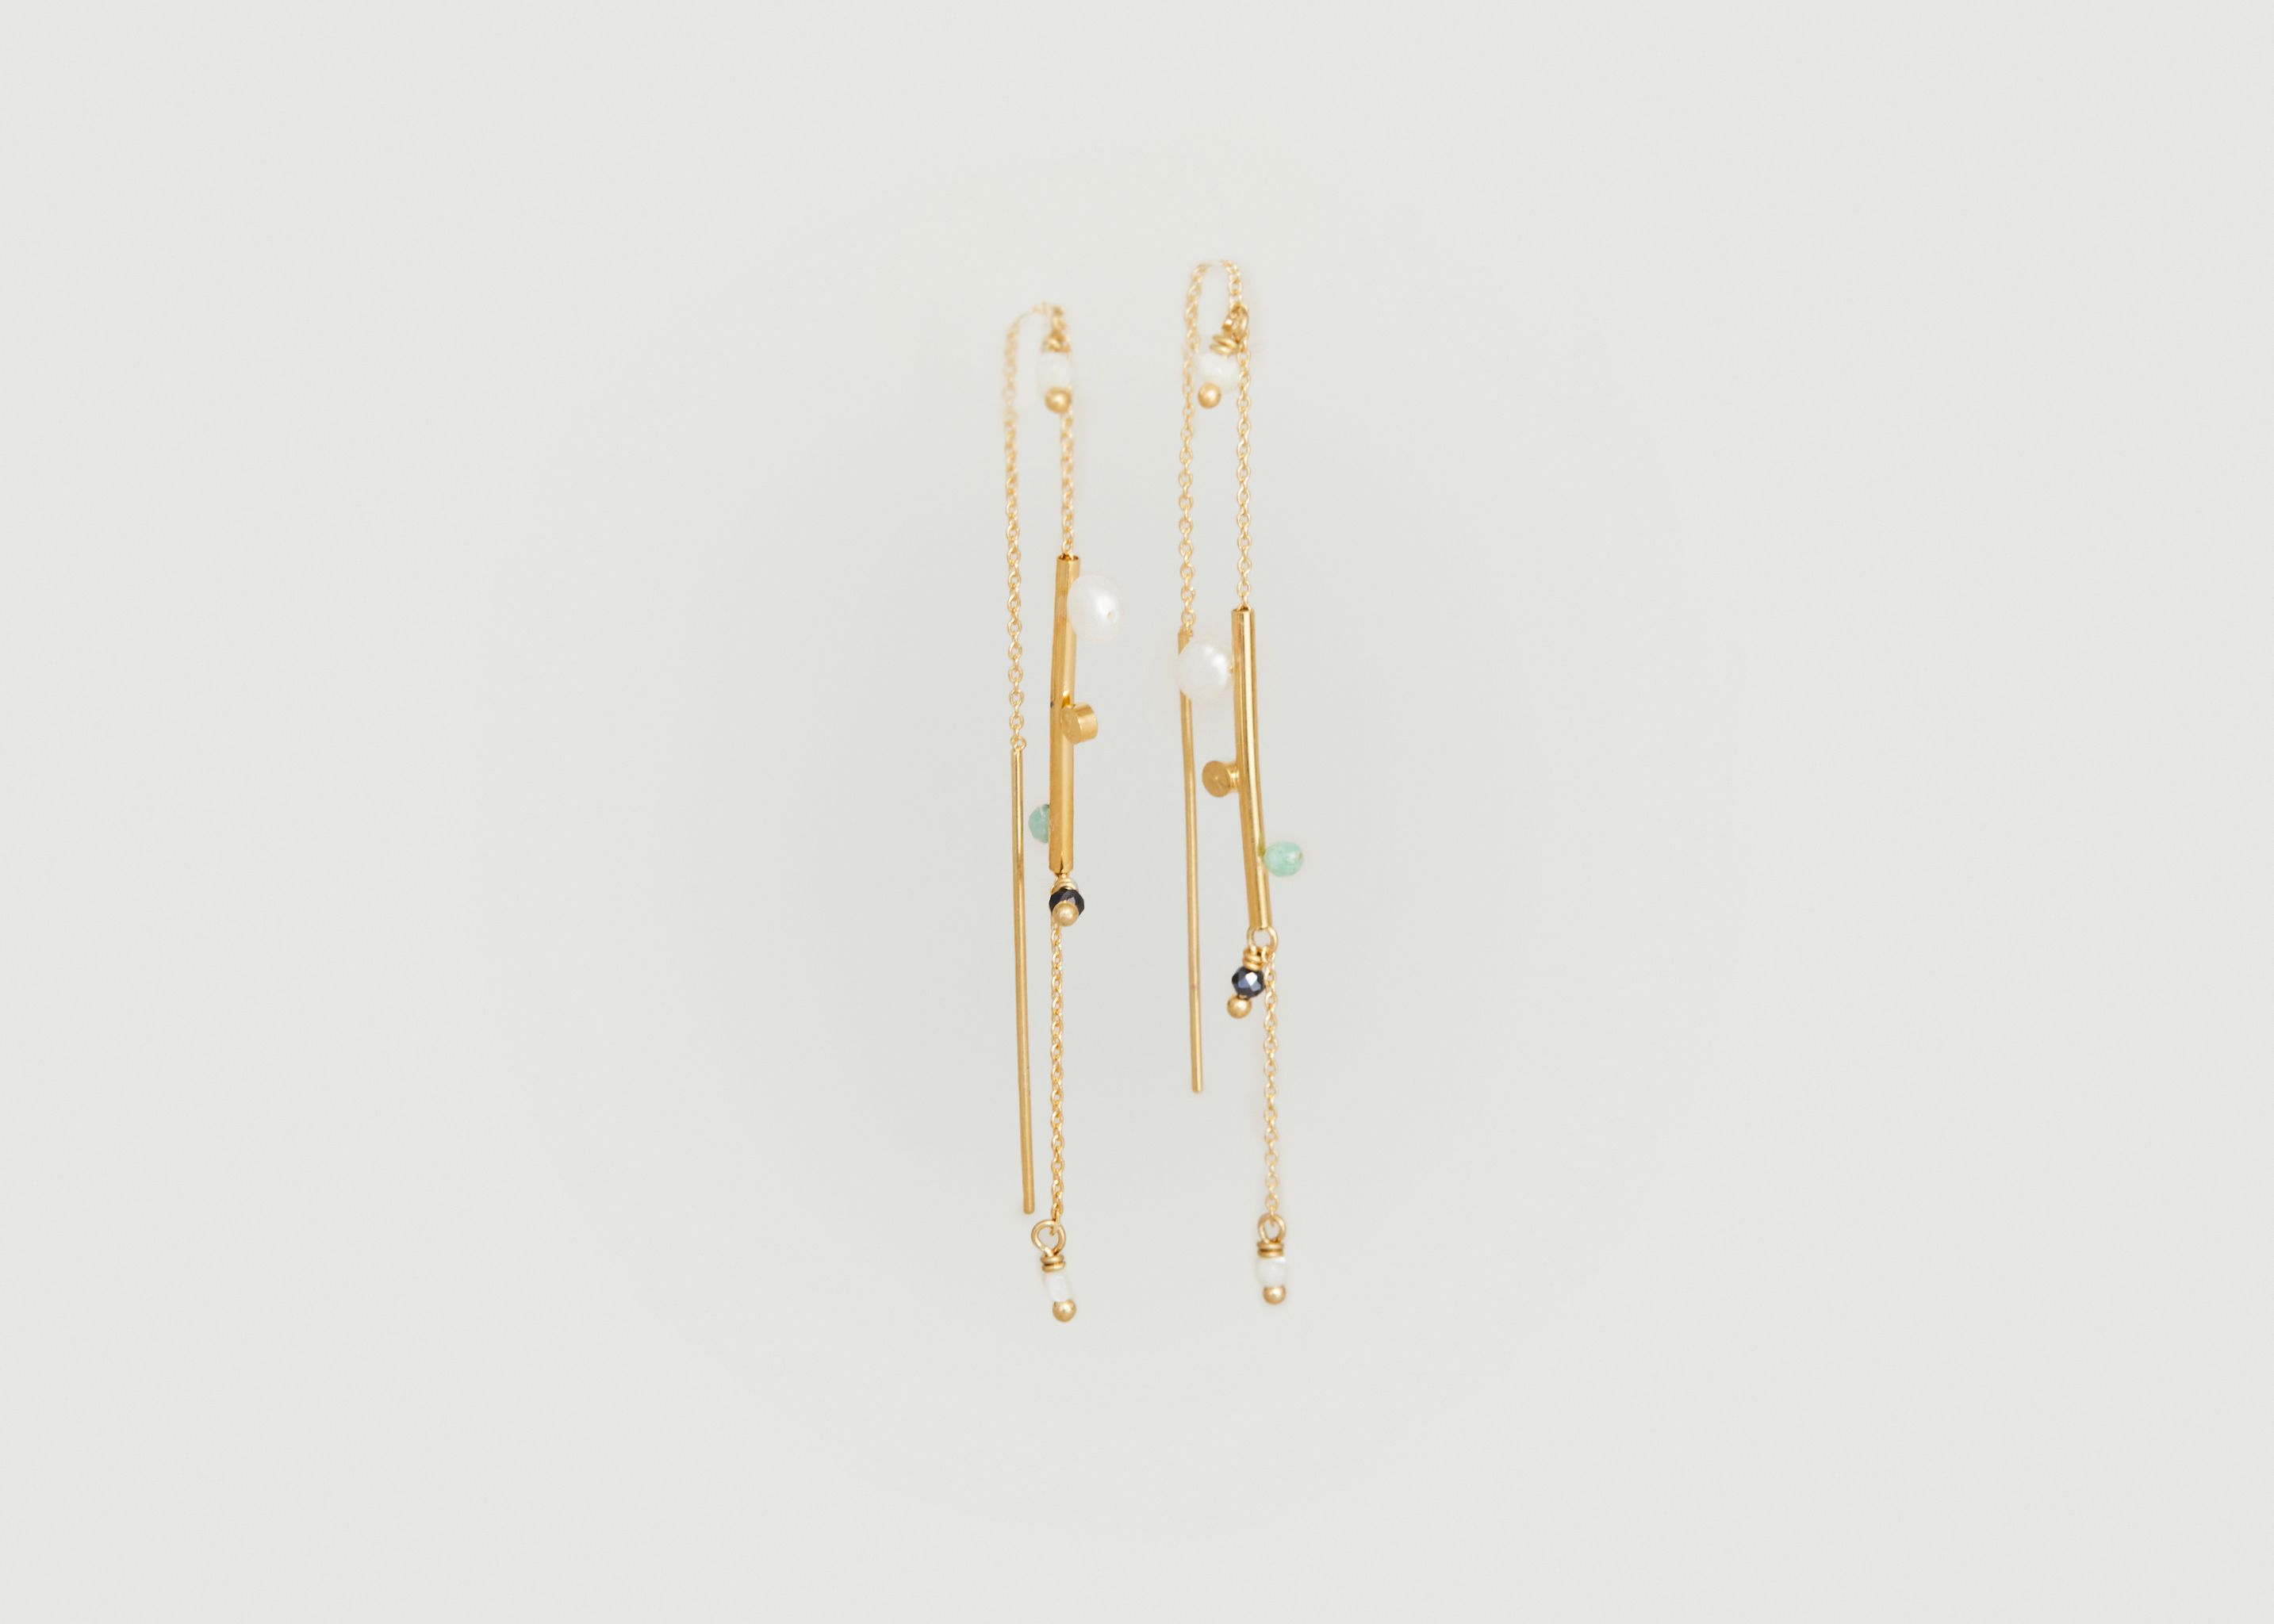 Elements long earrings in brass gilded with 24 carat gold - Judith Benita